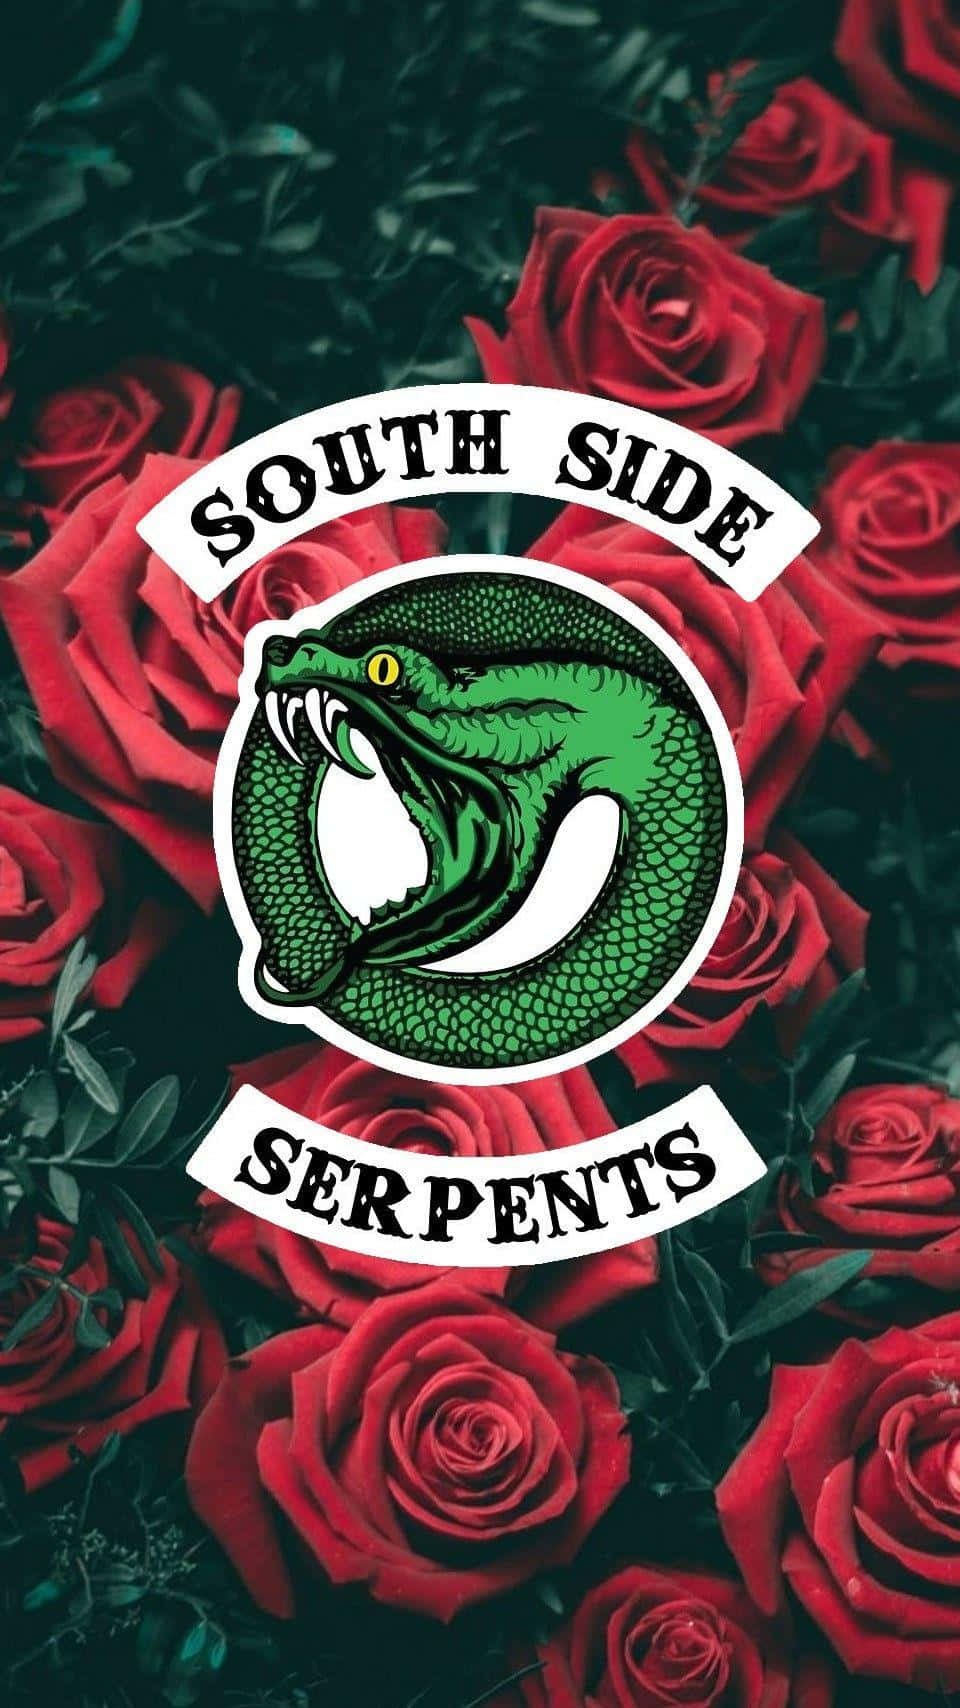 Join Southside Serpents and Experience Exciting Adventures Wallpaper